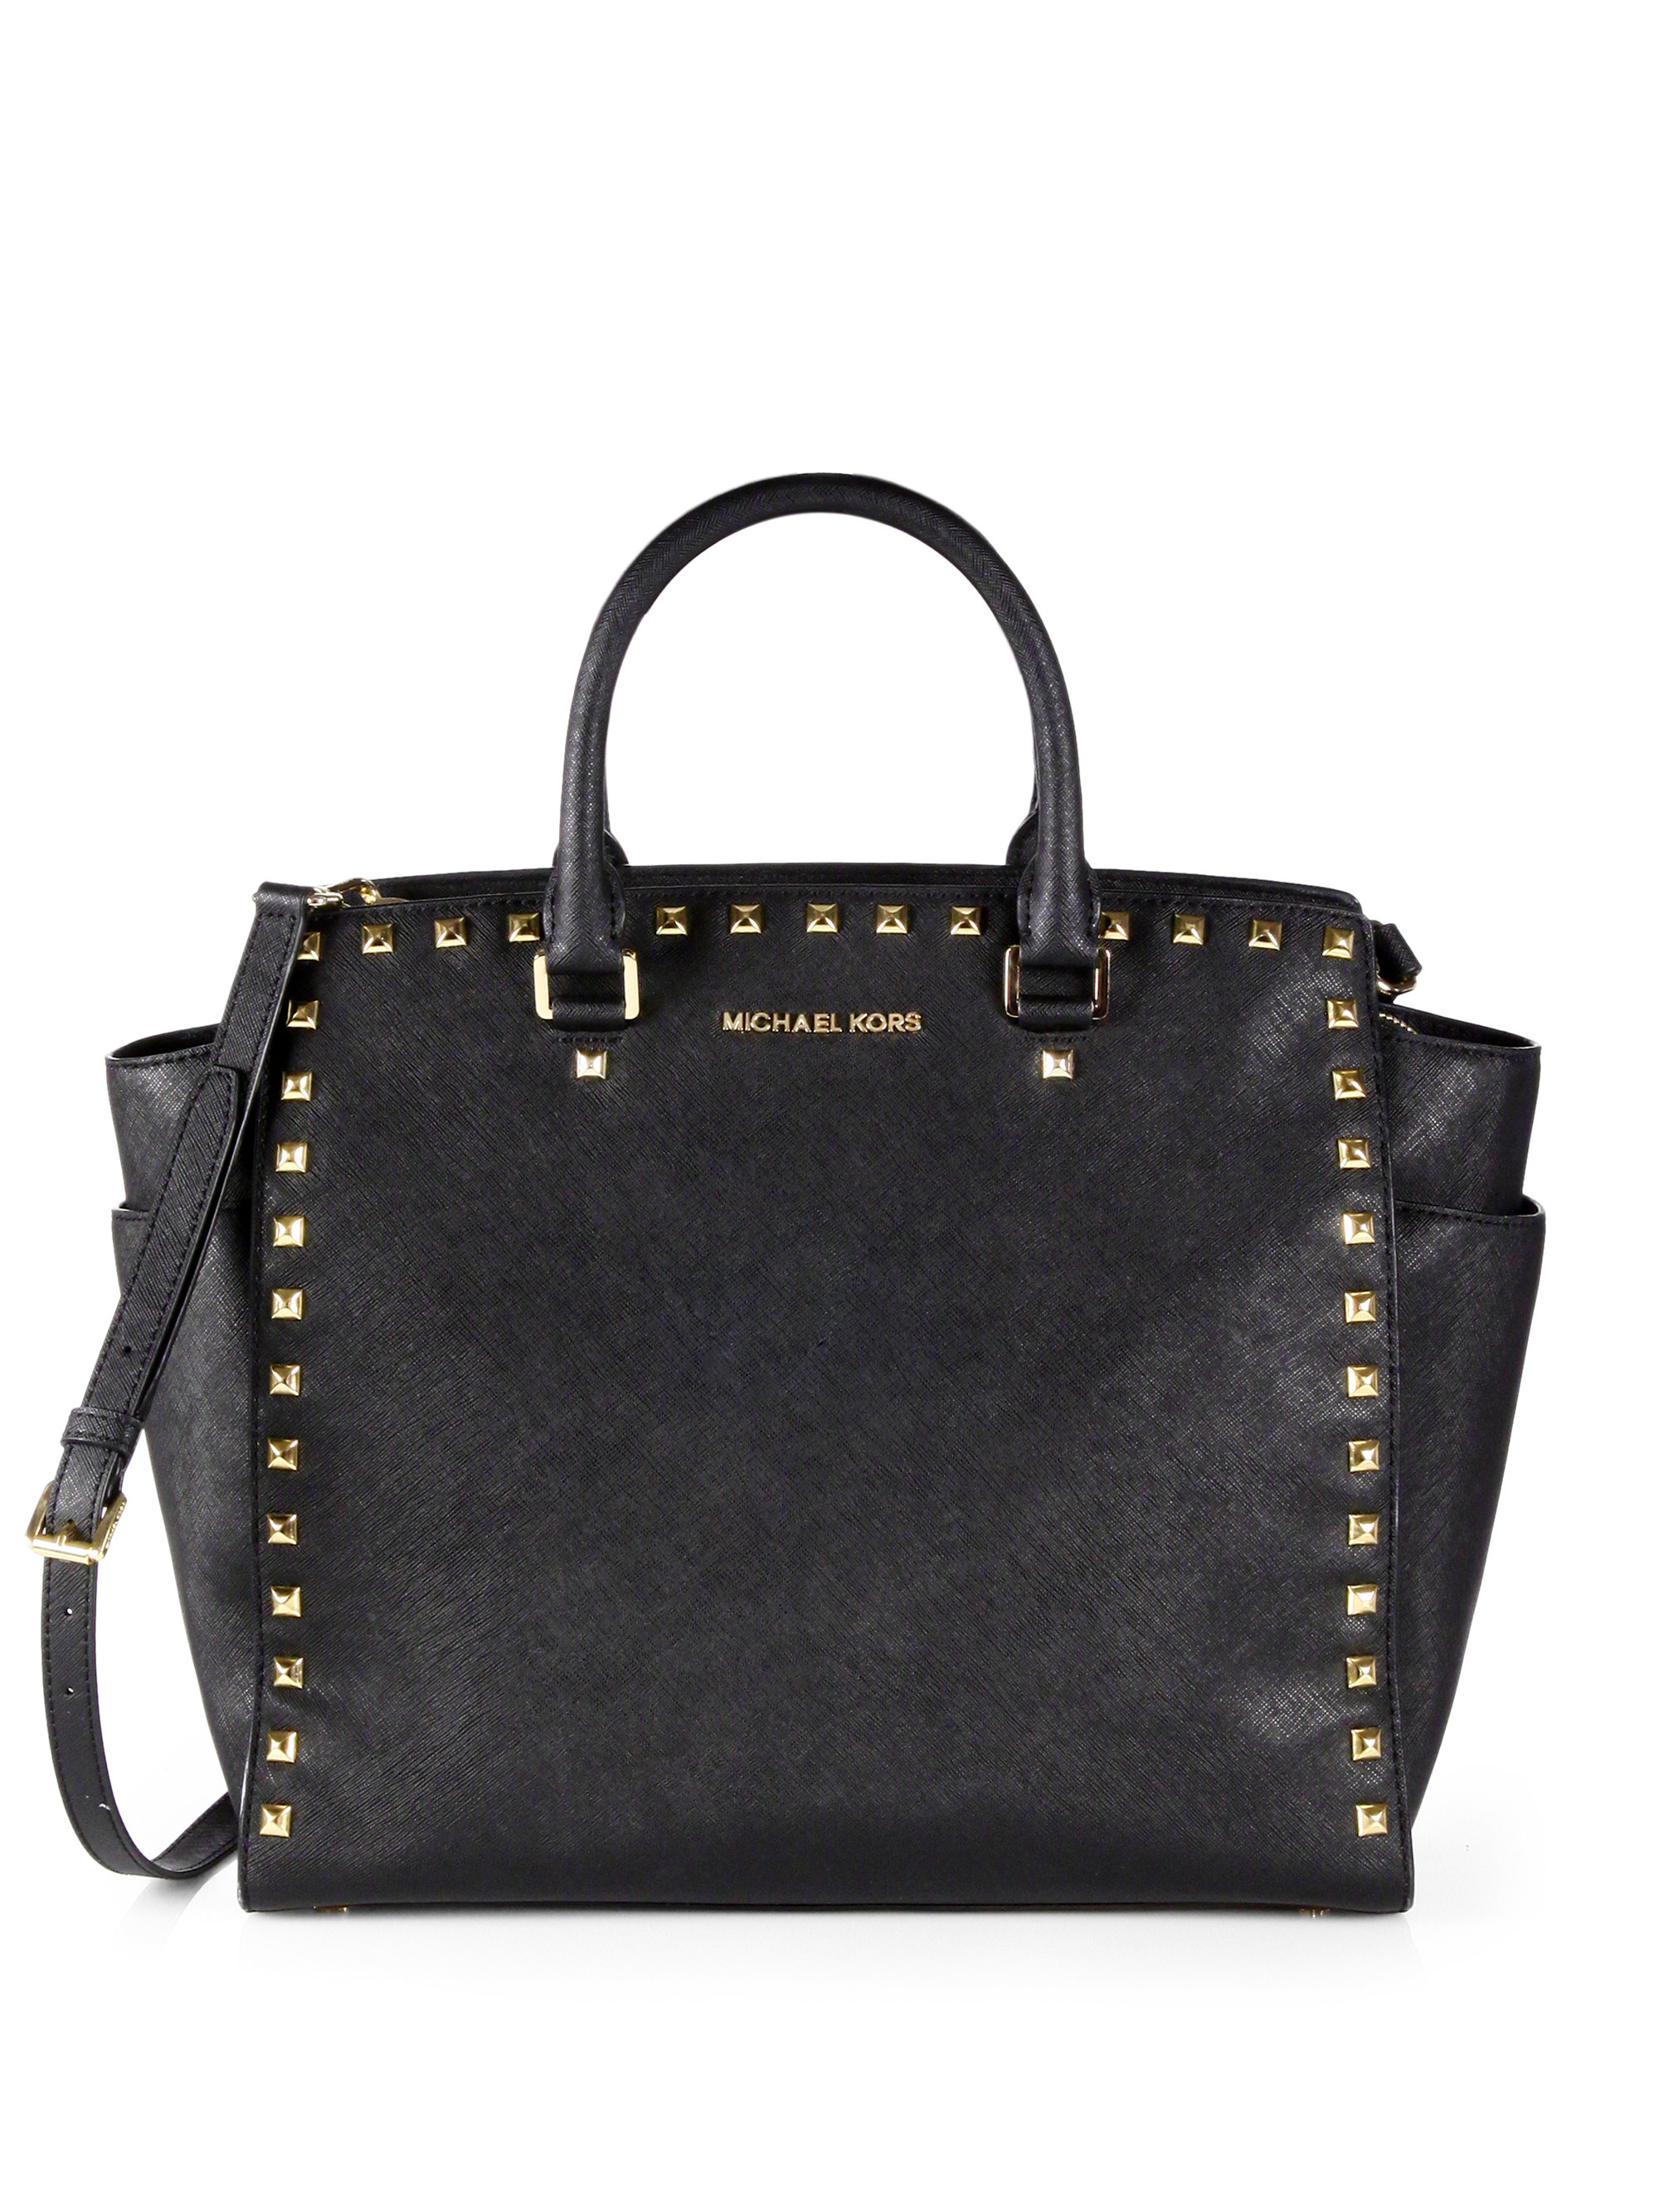 Michael Michael Kors Large Studded Tote Bag in Black | Lyst